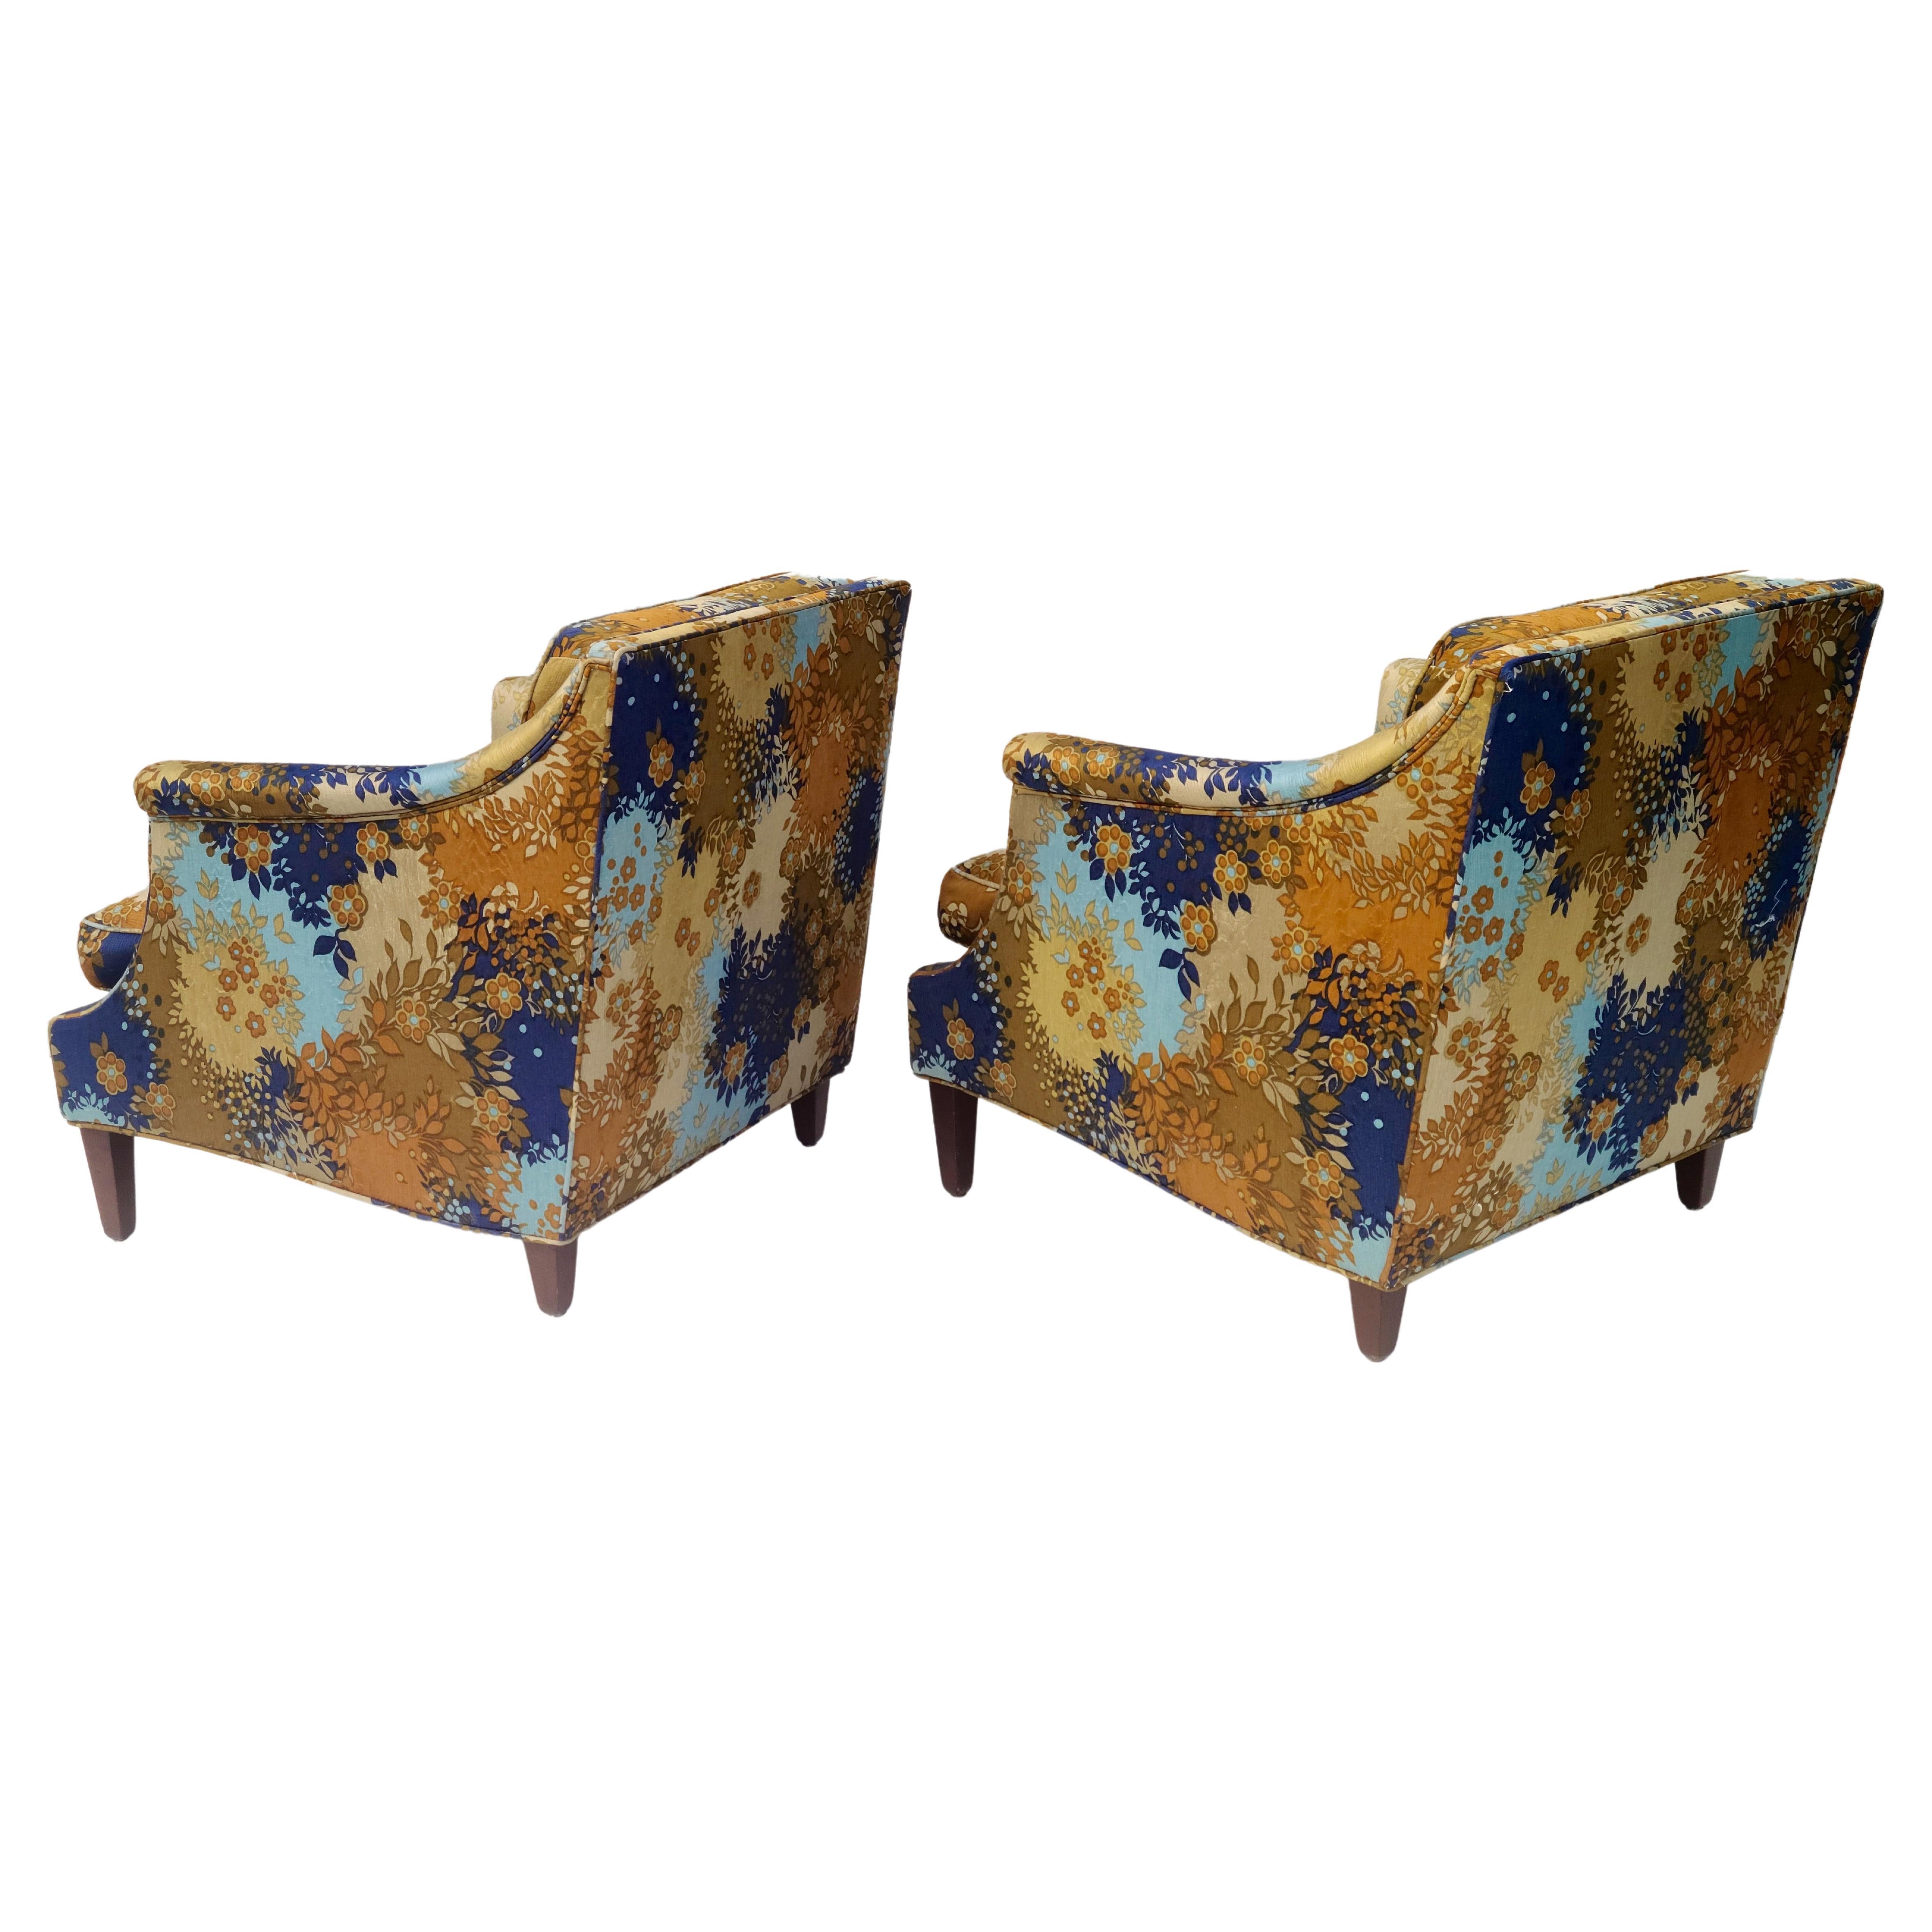 Mid-20th Century Pair Edward Wormley for Dunbar Lounge Chairs Rare Form For Sale